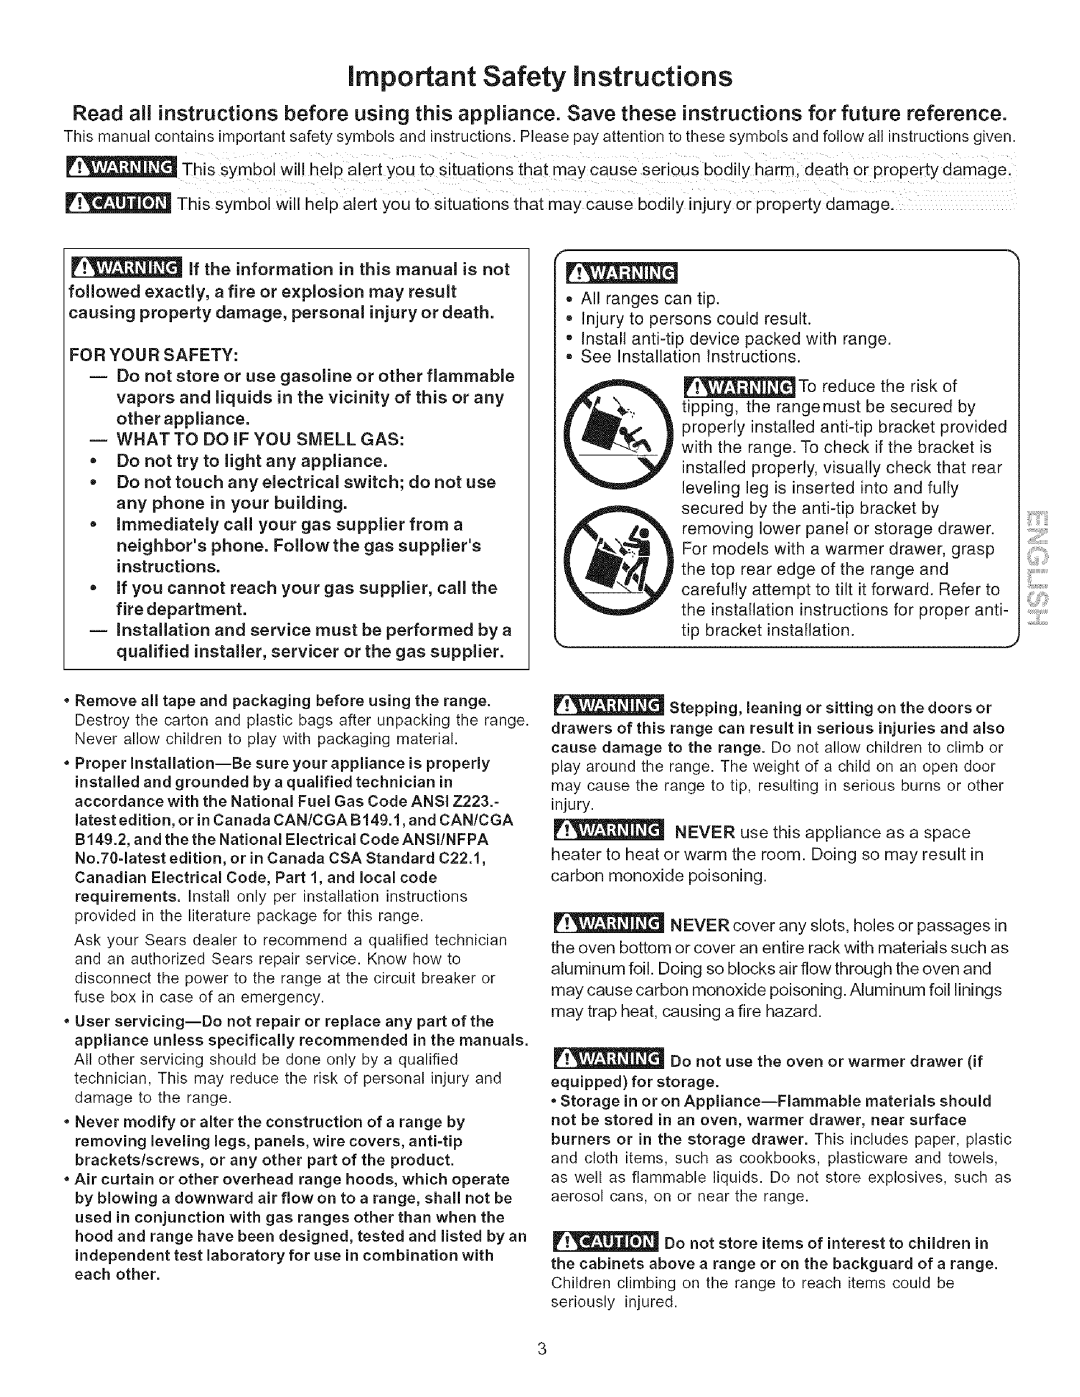 Kenmore 790.7943 manual important Safety instructions 